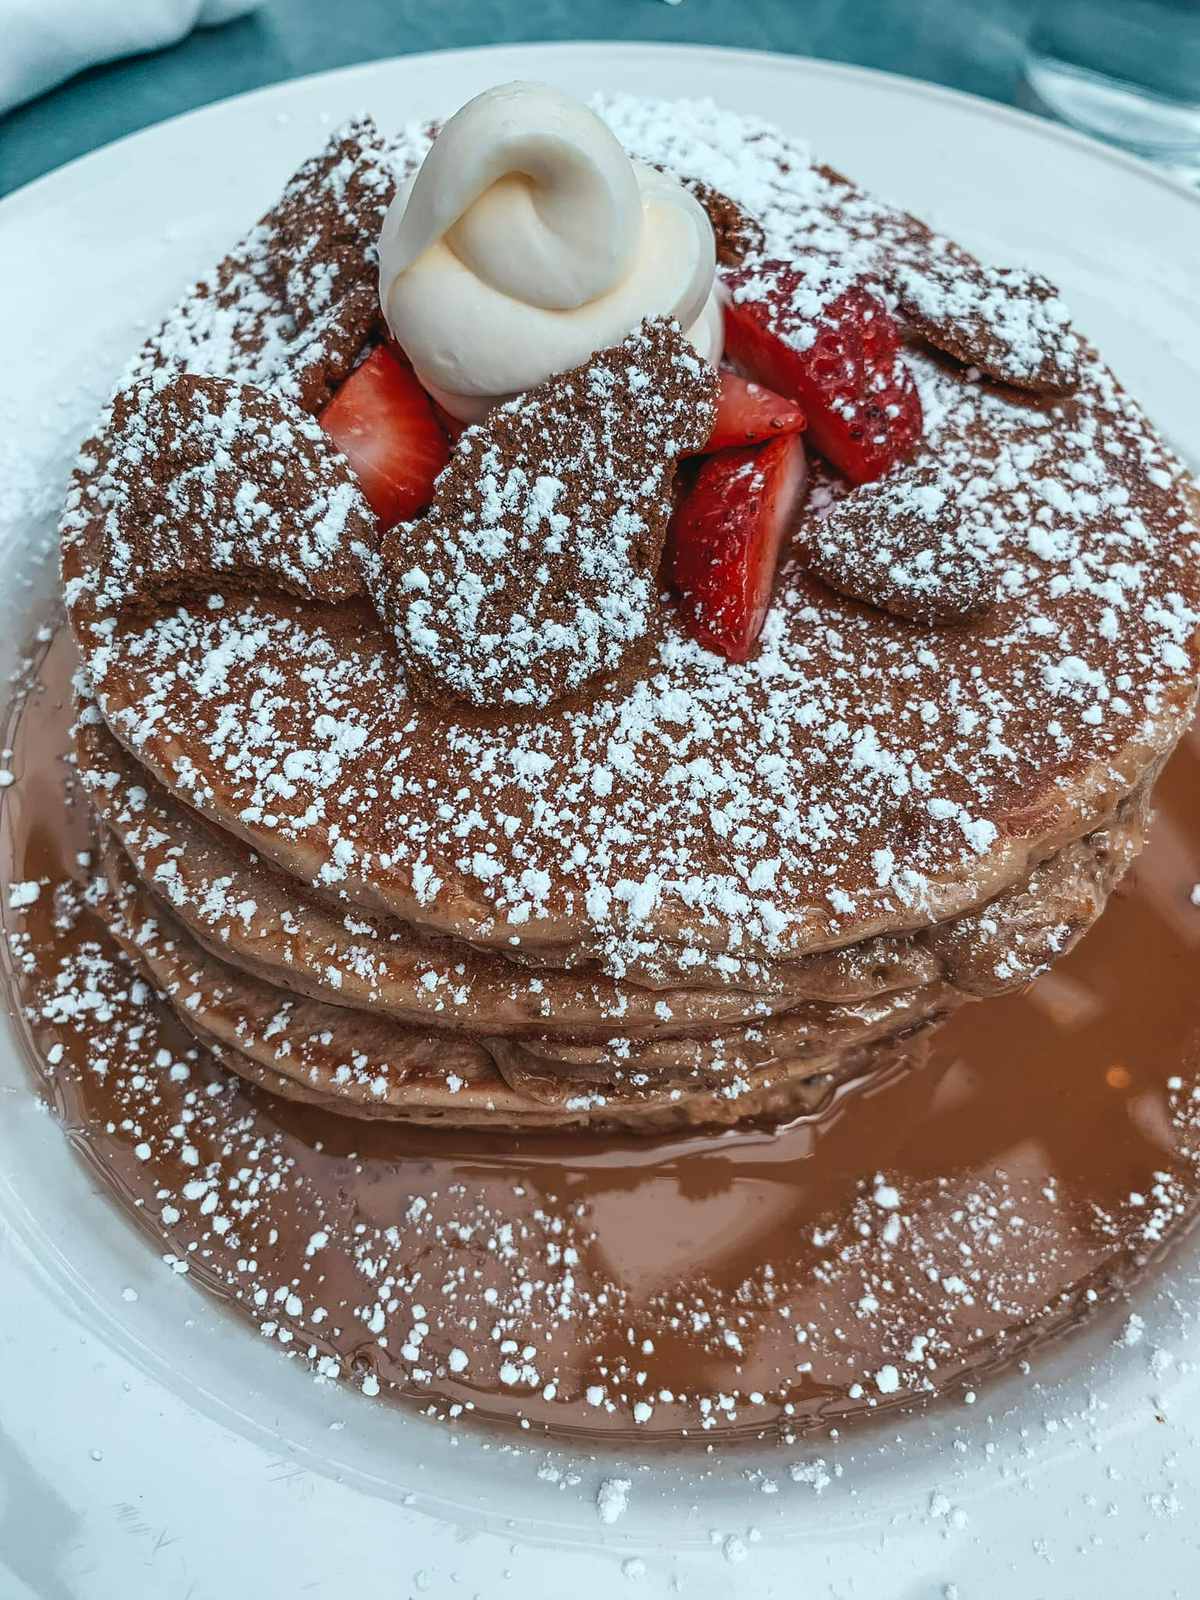 Gingerbread pancakes from Oxford Exchange in Tampa